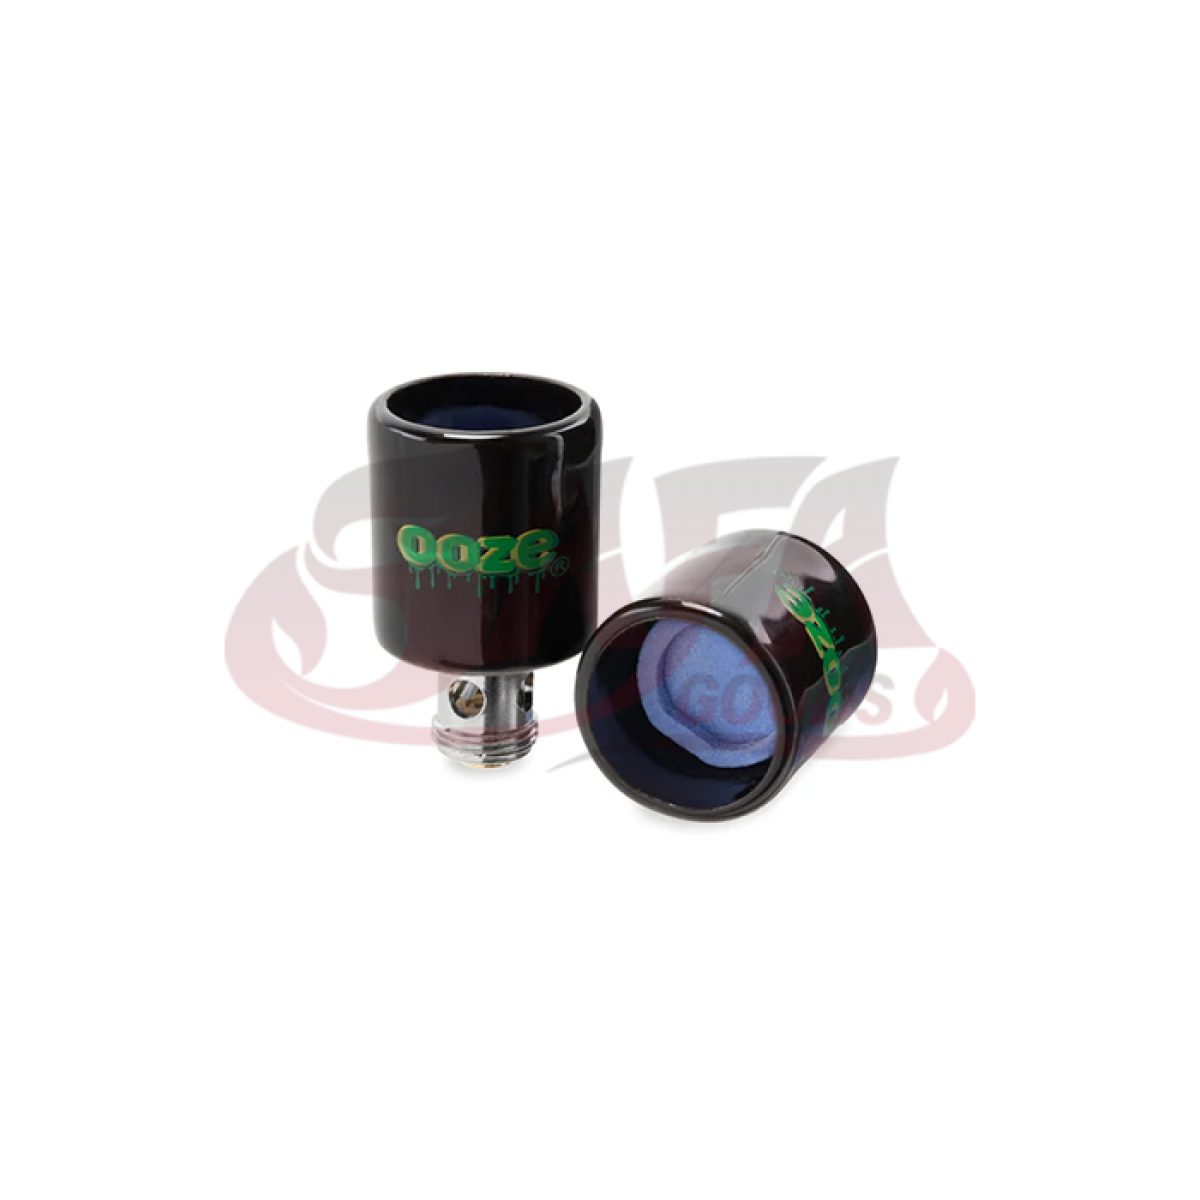 Ooze - Booster Onyx Atomizer [2PC]